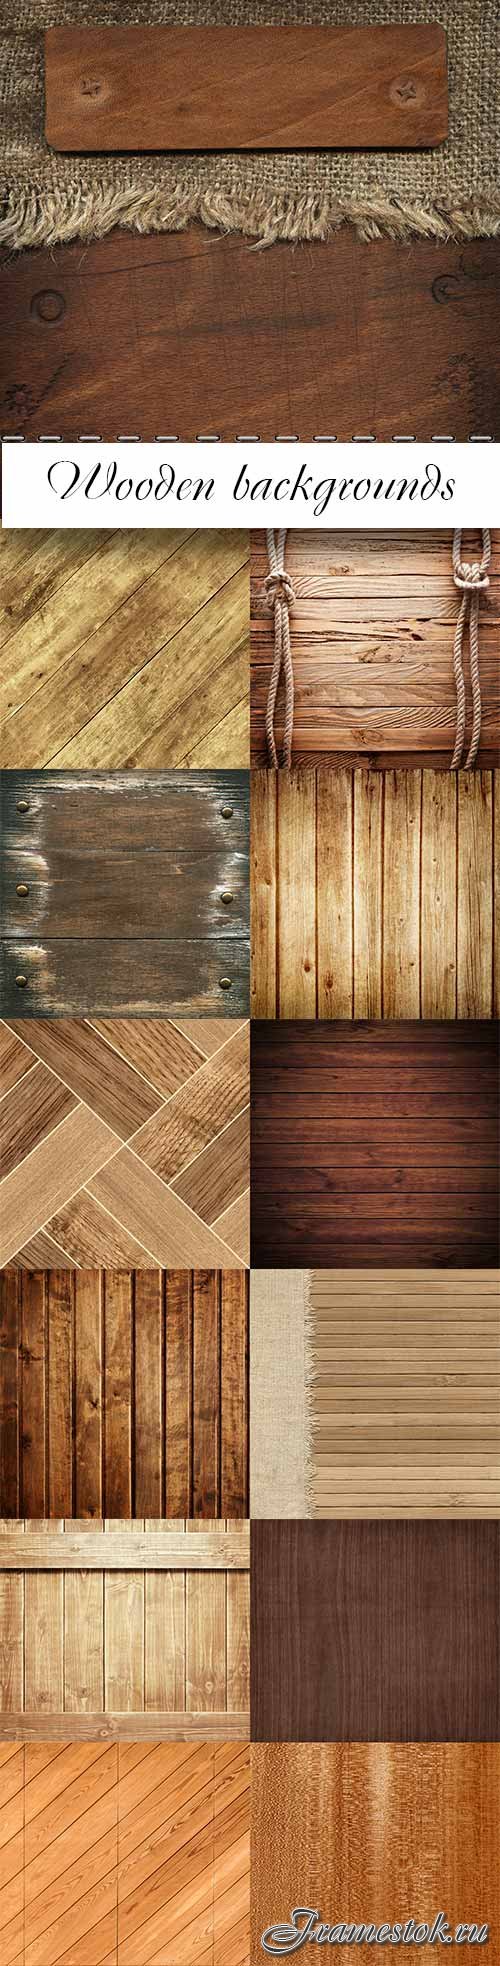 Excellent wood backgrounds